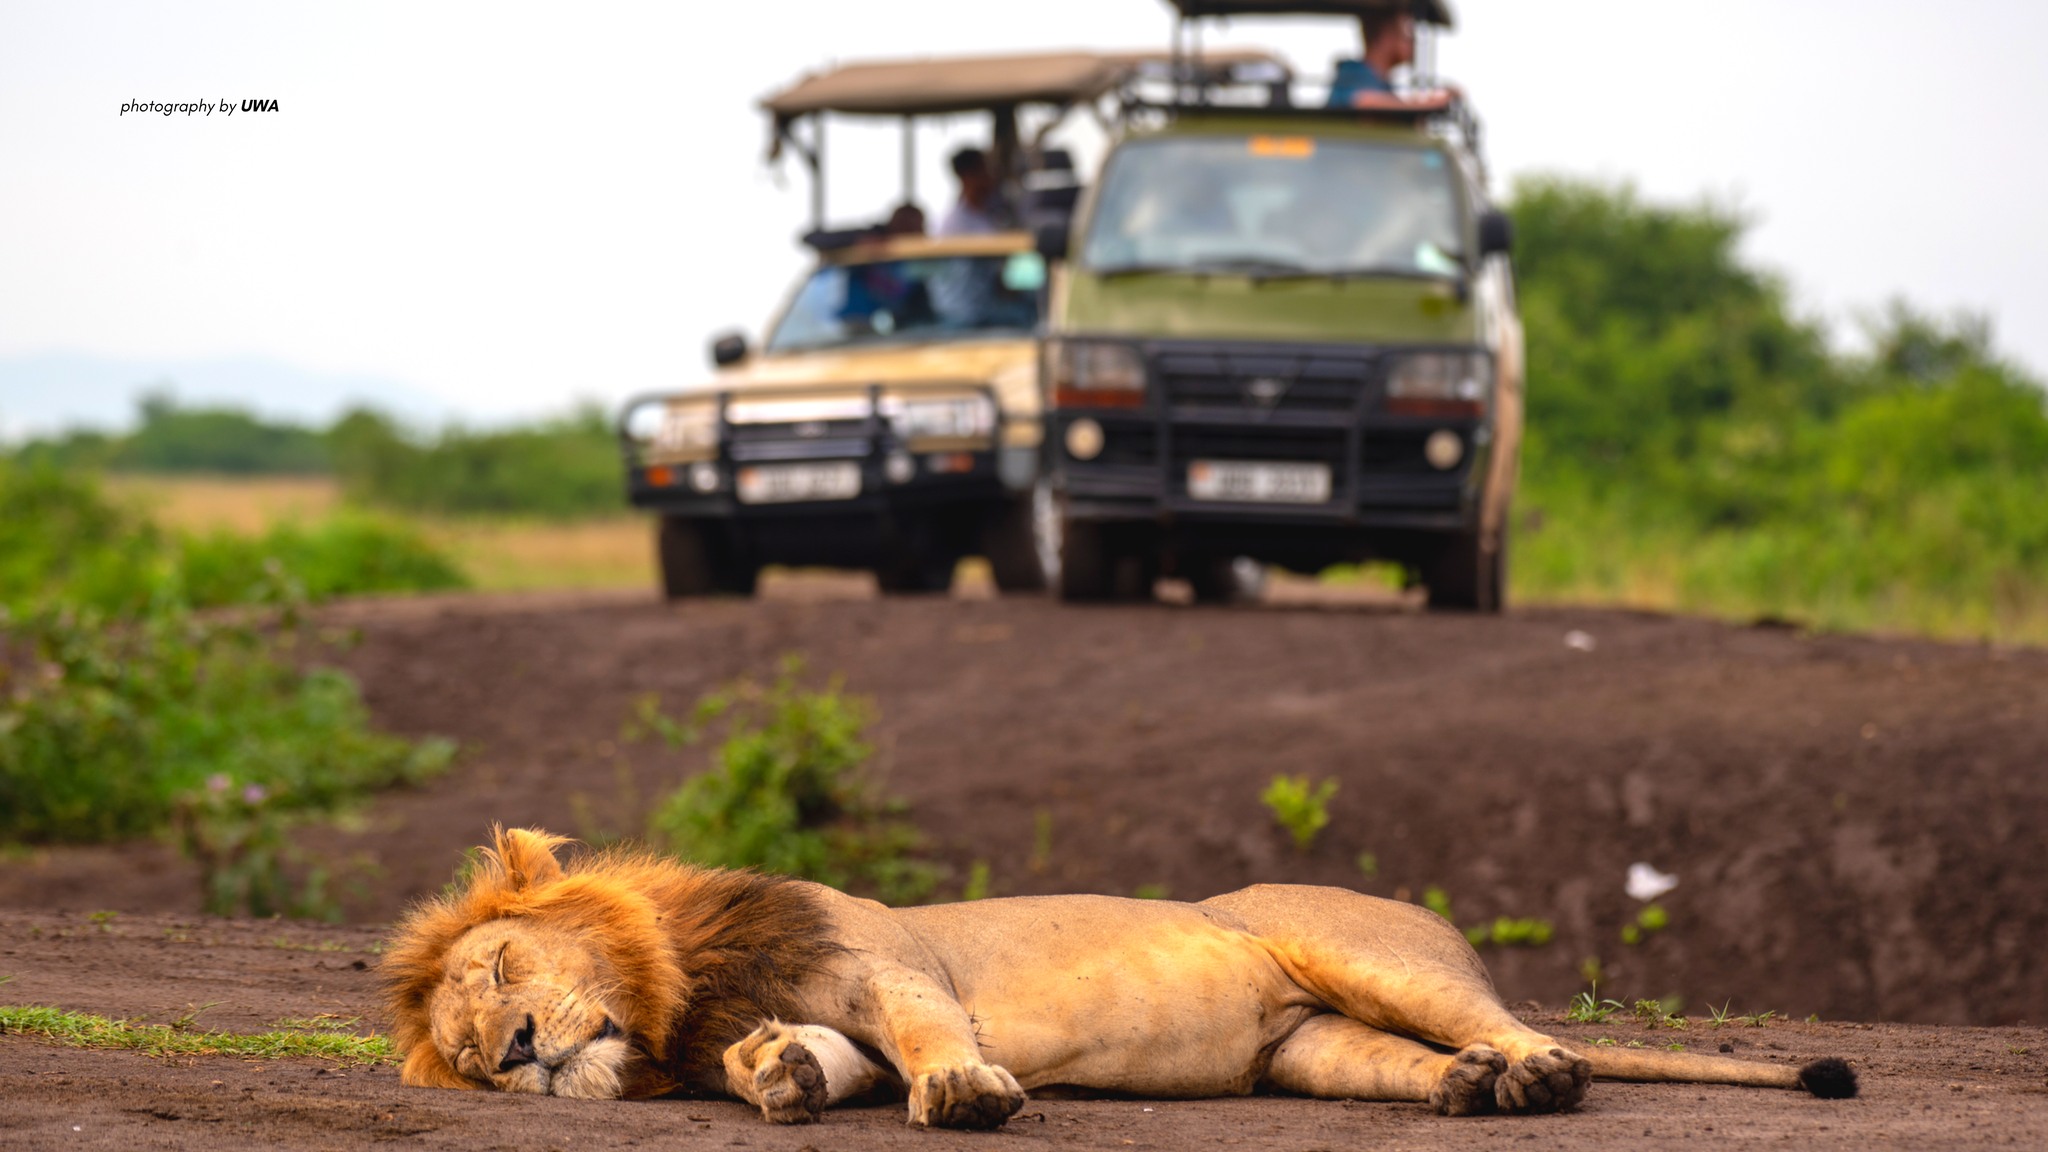 How to get to Akagera national park